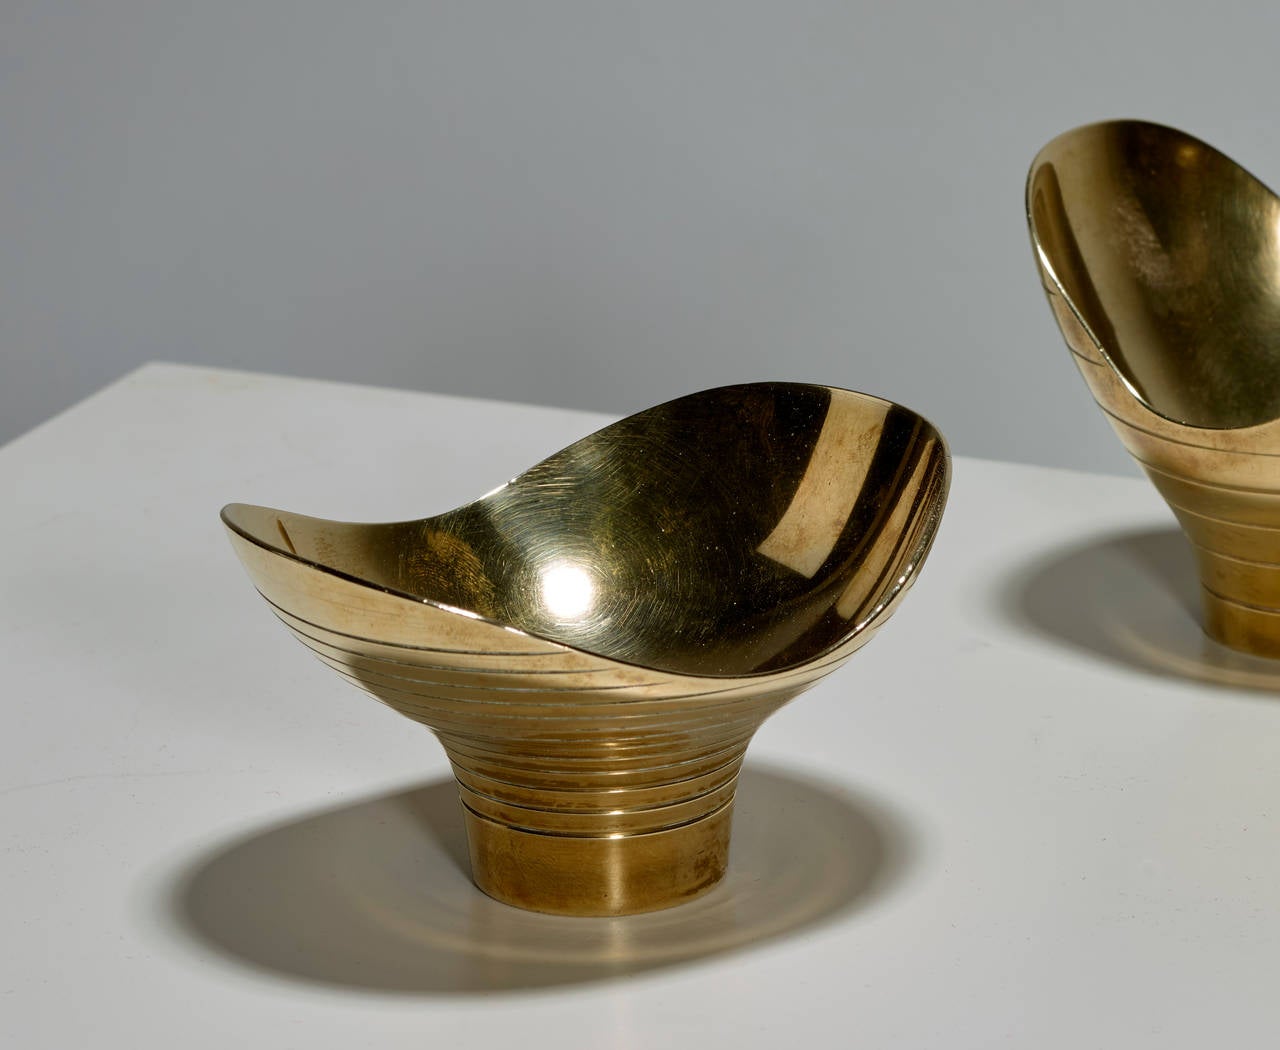 Scandinavian Modern Paavo Tynell Bronze Bowl for Taito Oy, 1940s